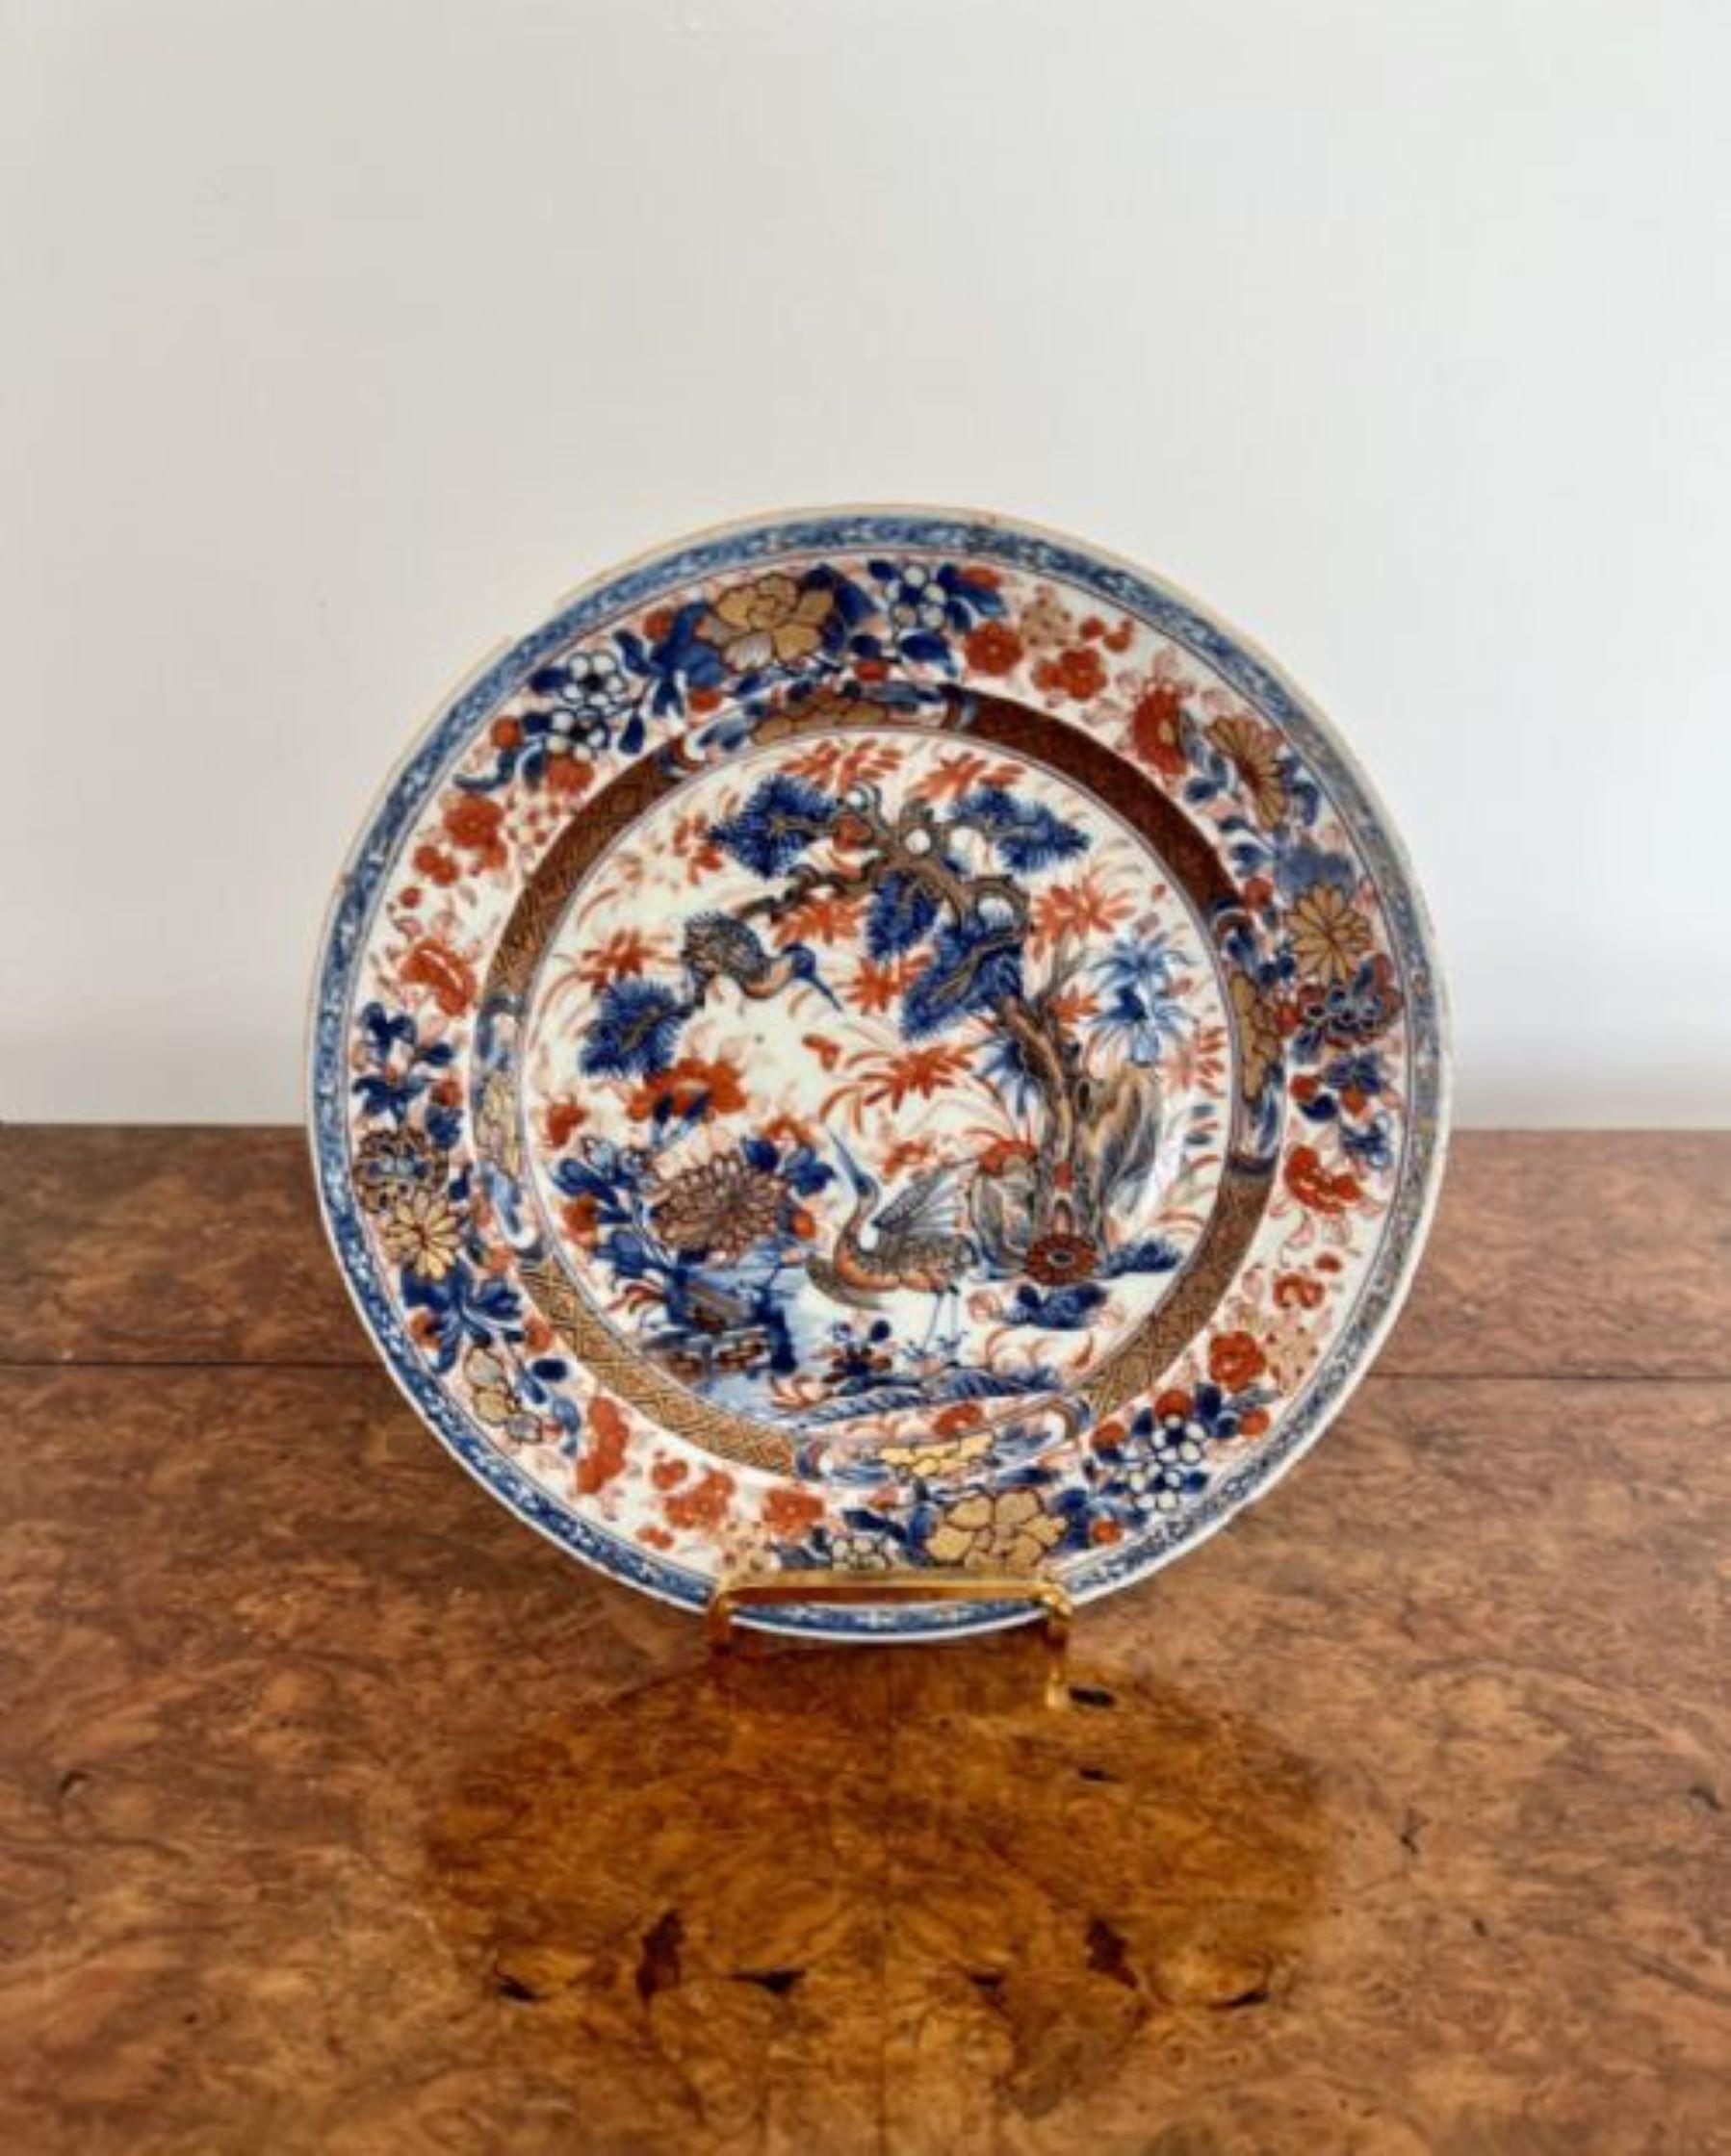 Fine quality 18th century Chinese plate having a quality 18th Century Chinese plate decorated with birds, trees and flowers in wonderful blue, red, gold and white colours. Minor chips to the rim as shown. 

D. 1780